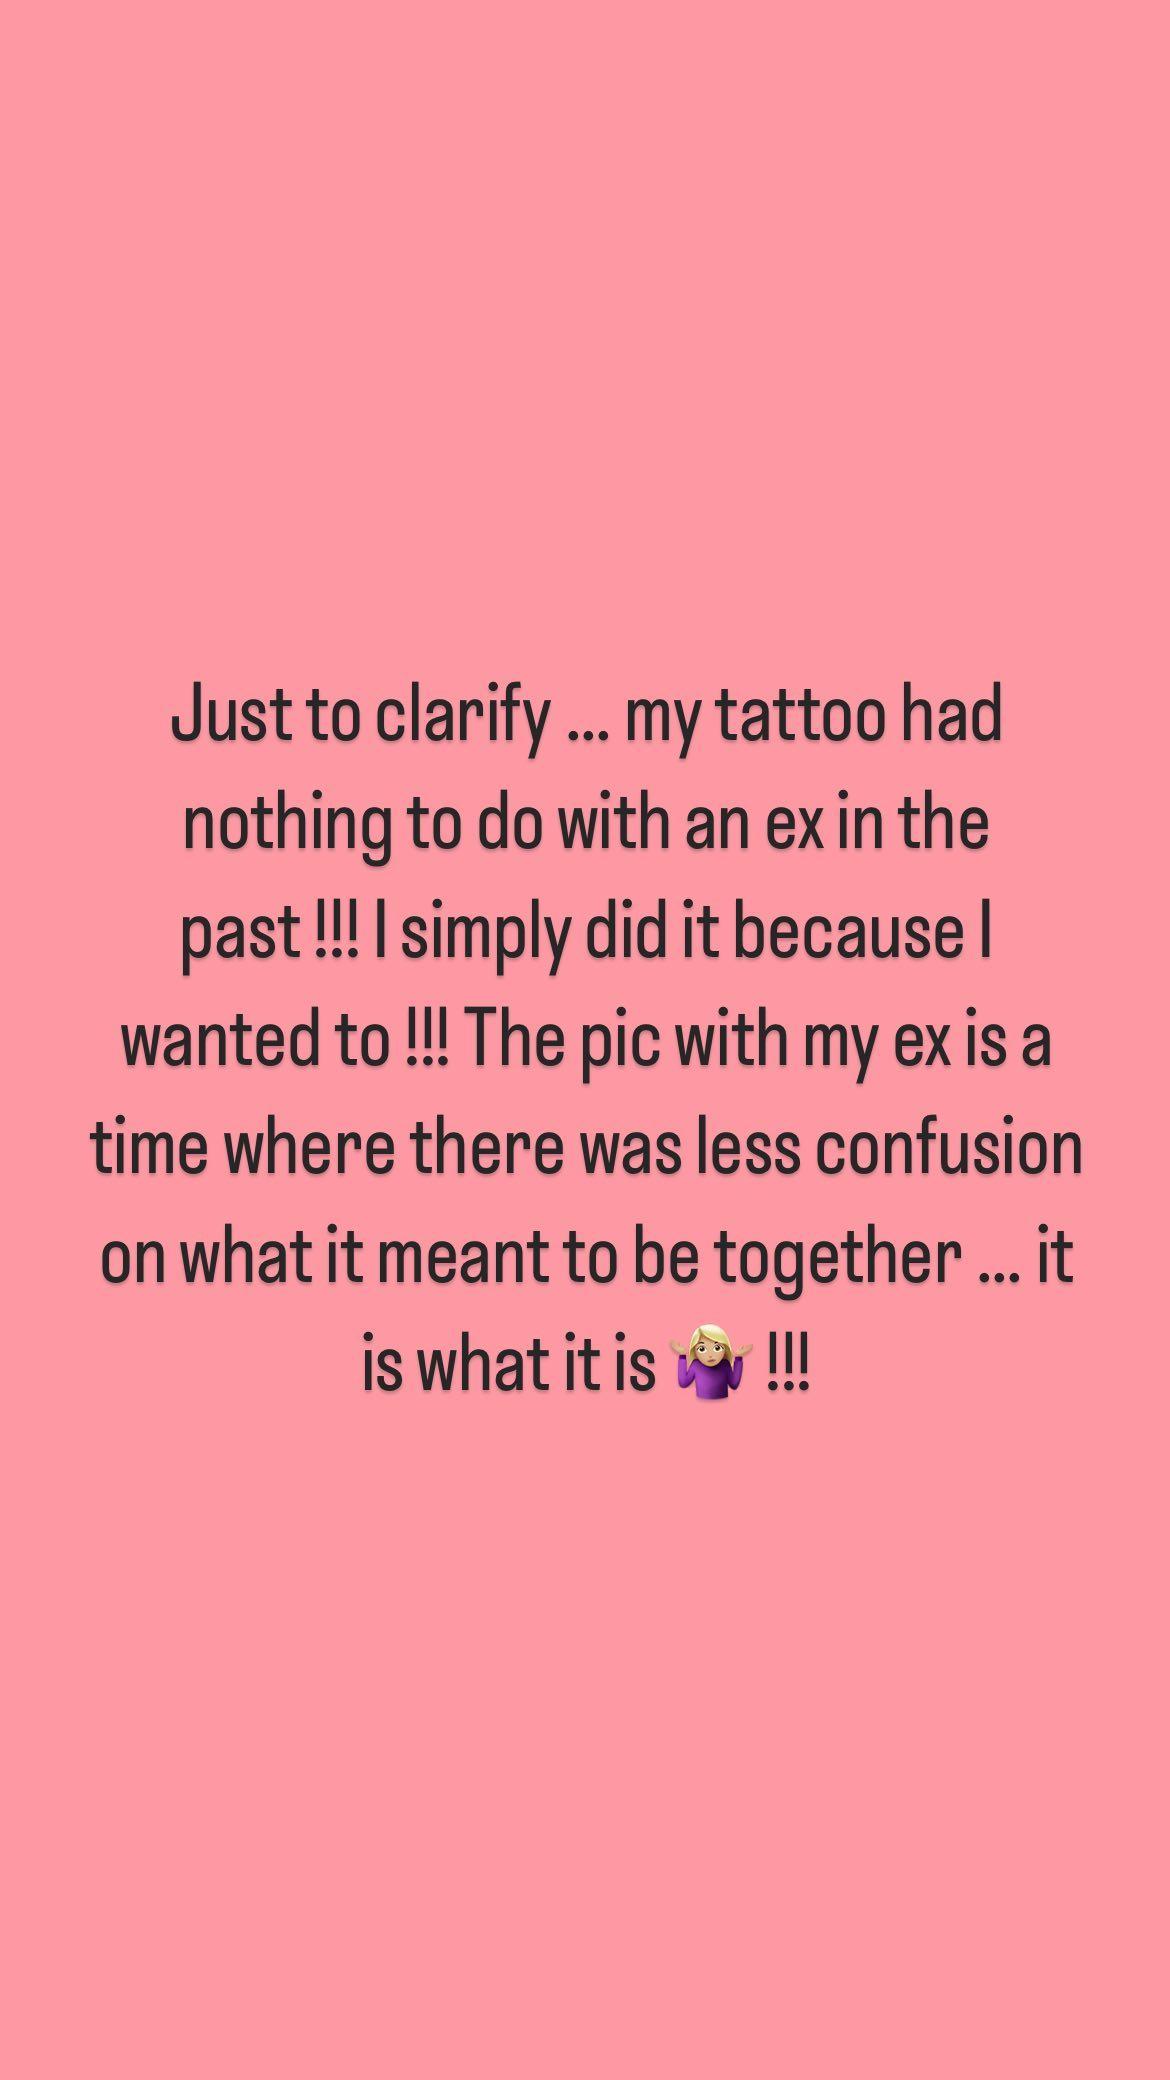 Britney Spears talks about her new tattoo